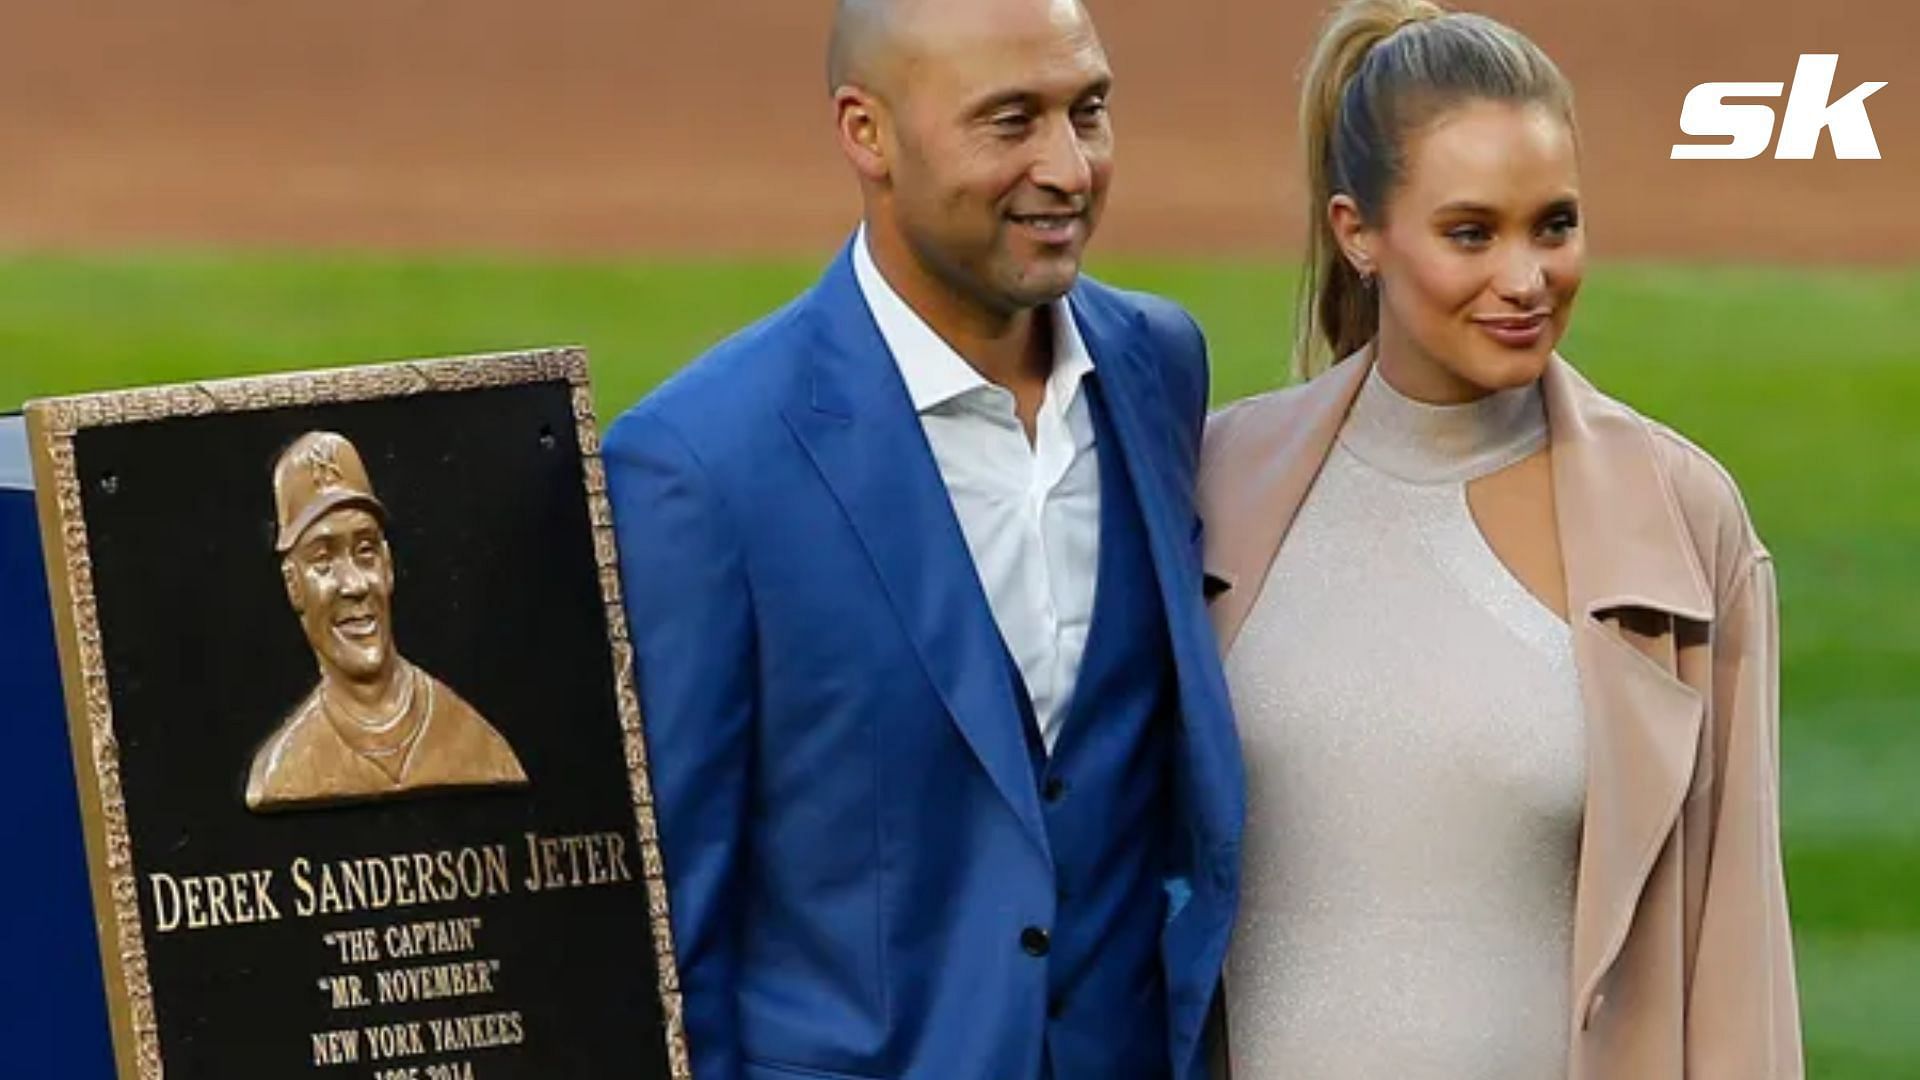 Derek Jeter with wife Hannah at Hall of Fame induction. 